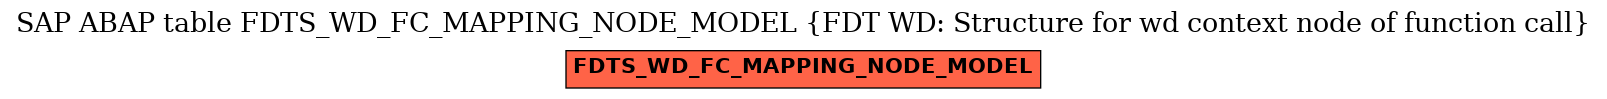 E-R Diagram for table FDTS_WD_FC_MAPPING_NODE_MODEL (FDT WD: Structure for wd context node of function call)